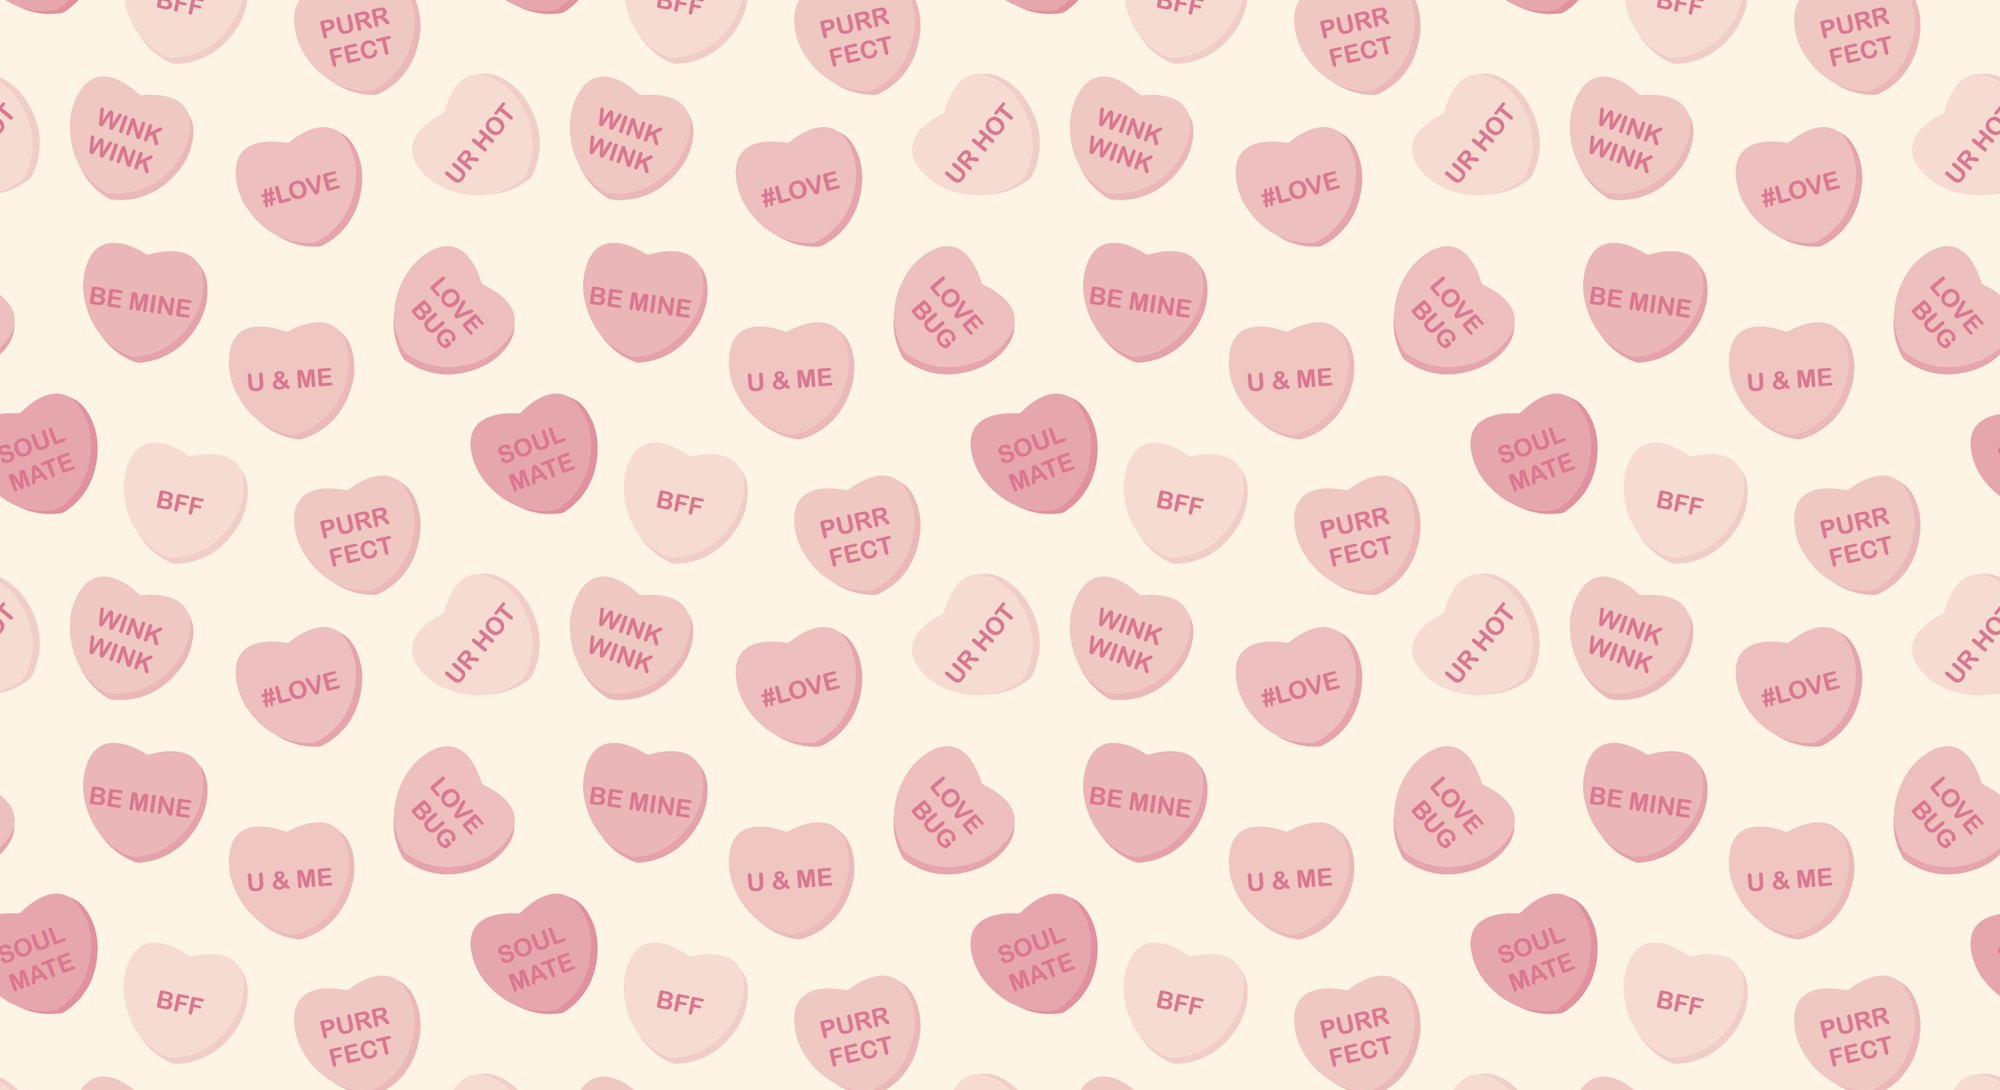 Candy Hearts Seamless Pattern - Pastel rainbow conversation heart candy design for Valentine's Day